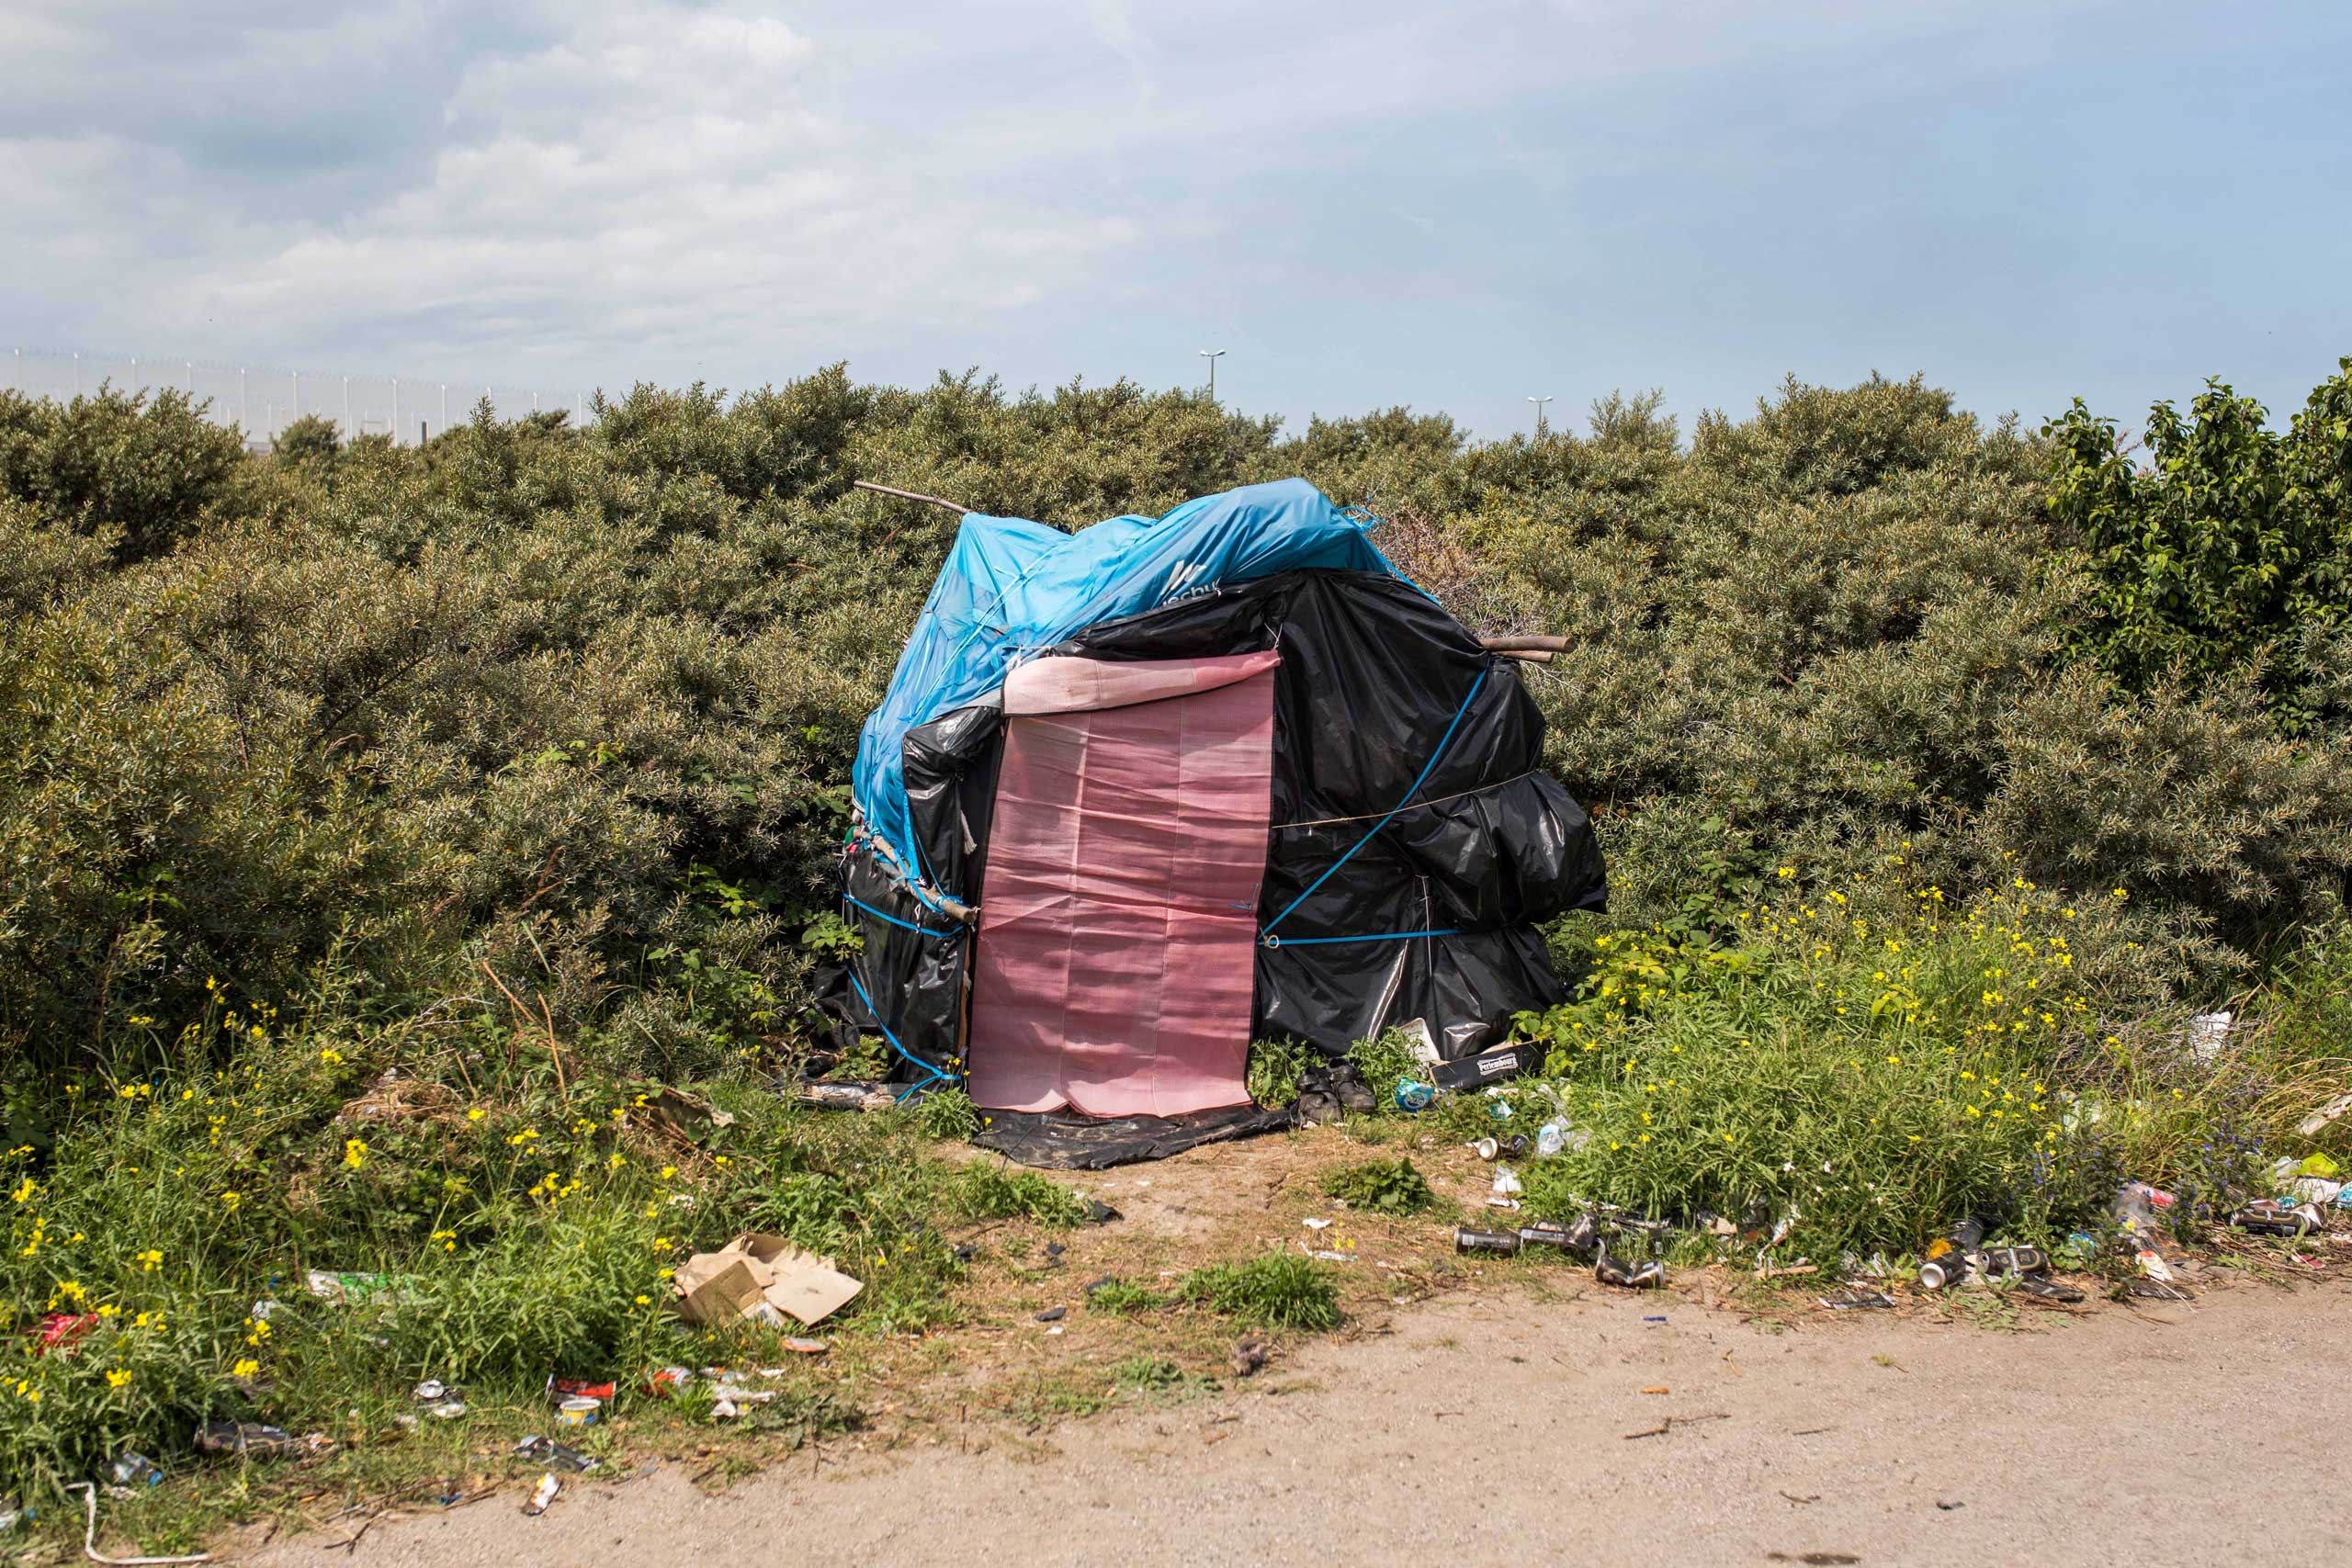 A tent at a make shift camp near the port of Calais, on July 31, 2015. (Rob Stothard—Getty Images)